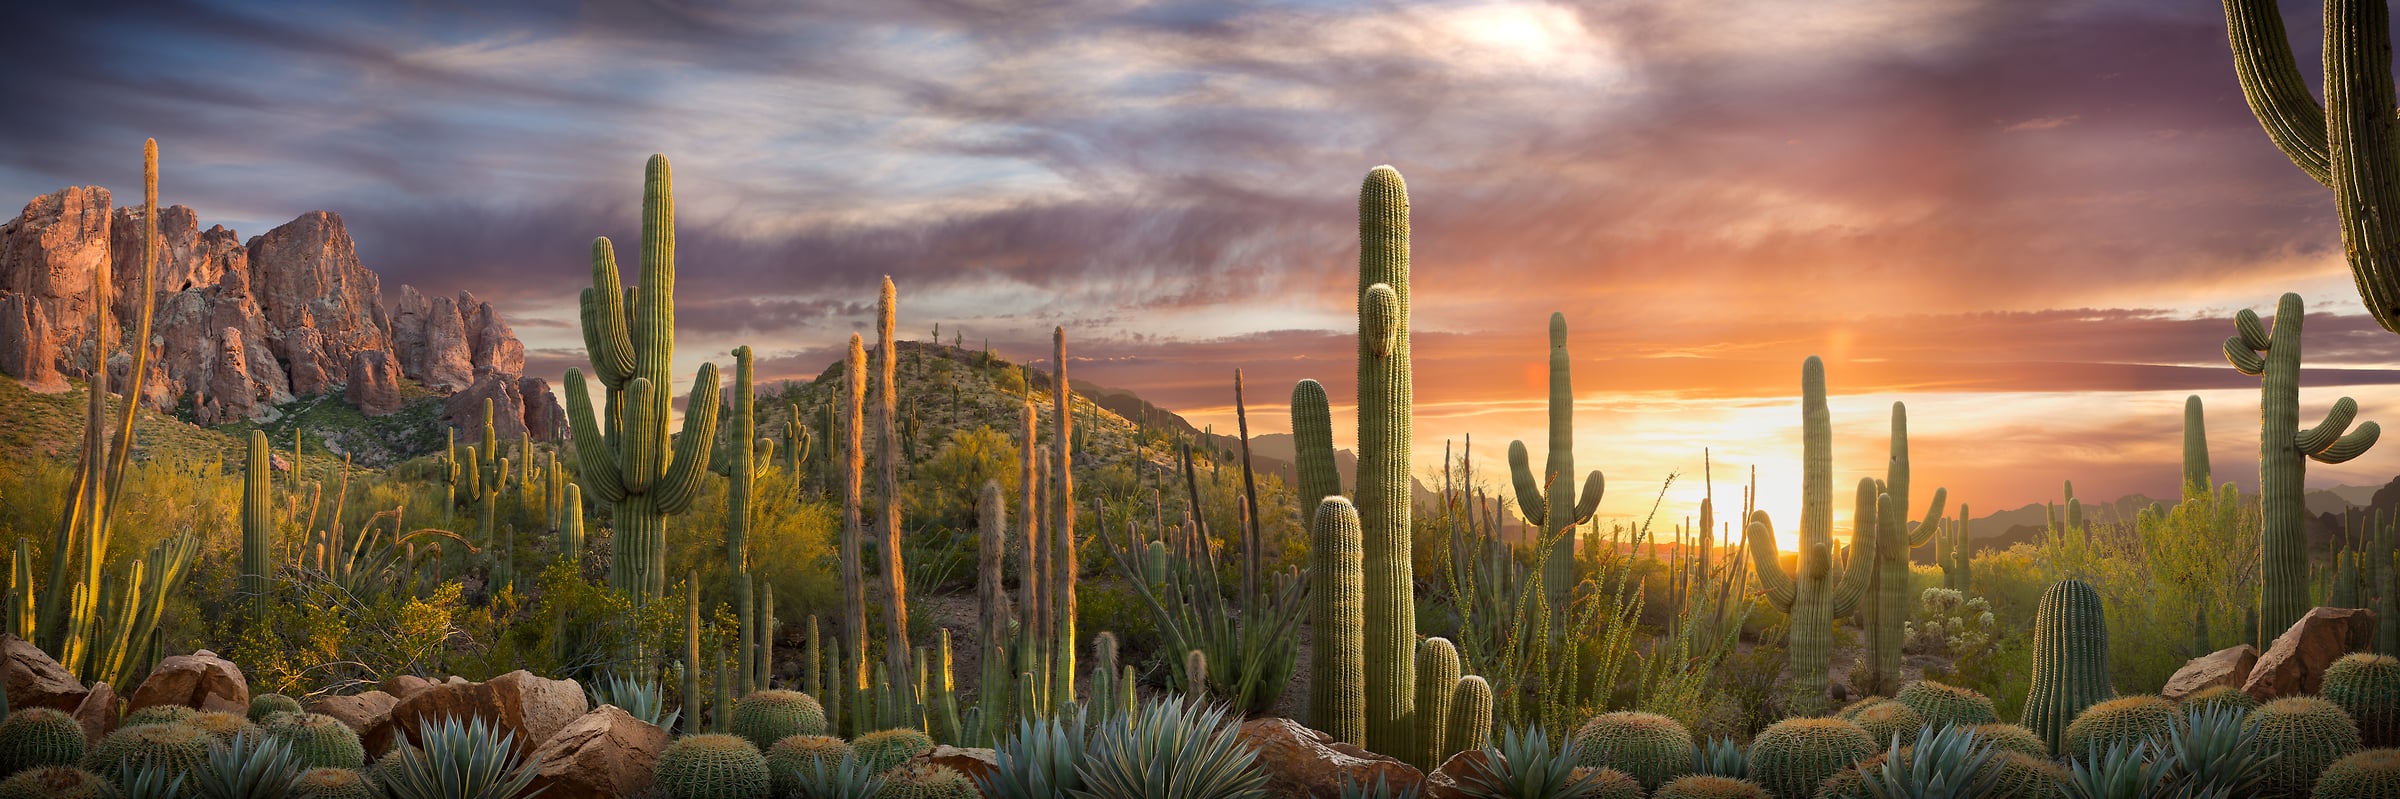 432 megapixels! A very high resolution, panorama photo of a desert landscape at sunset with cacti and succulent plants; photograph created by Nick Pedersen in the Superstition Mountains in Arizona.